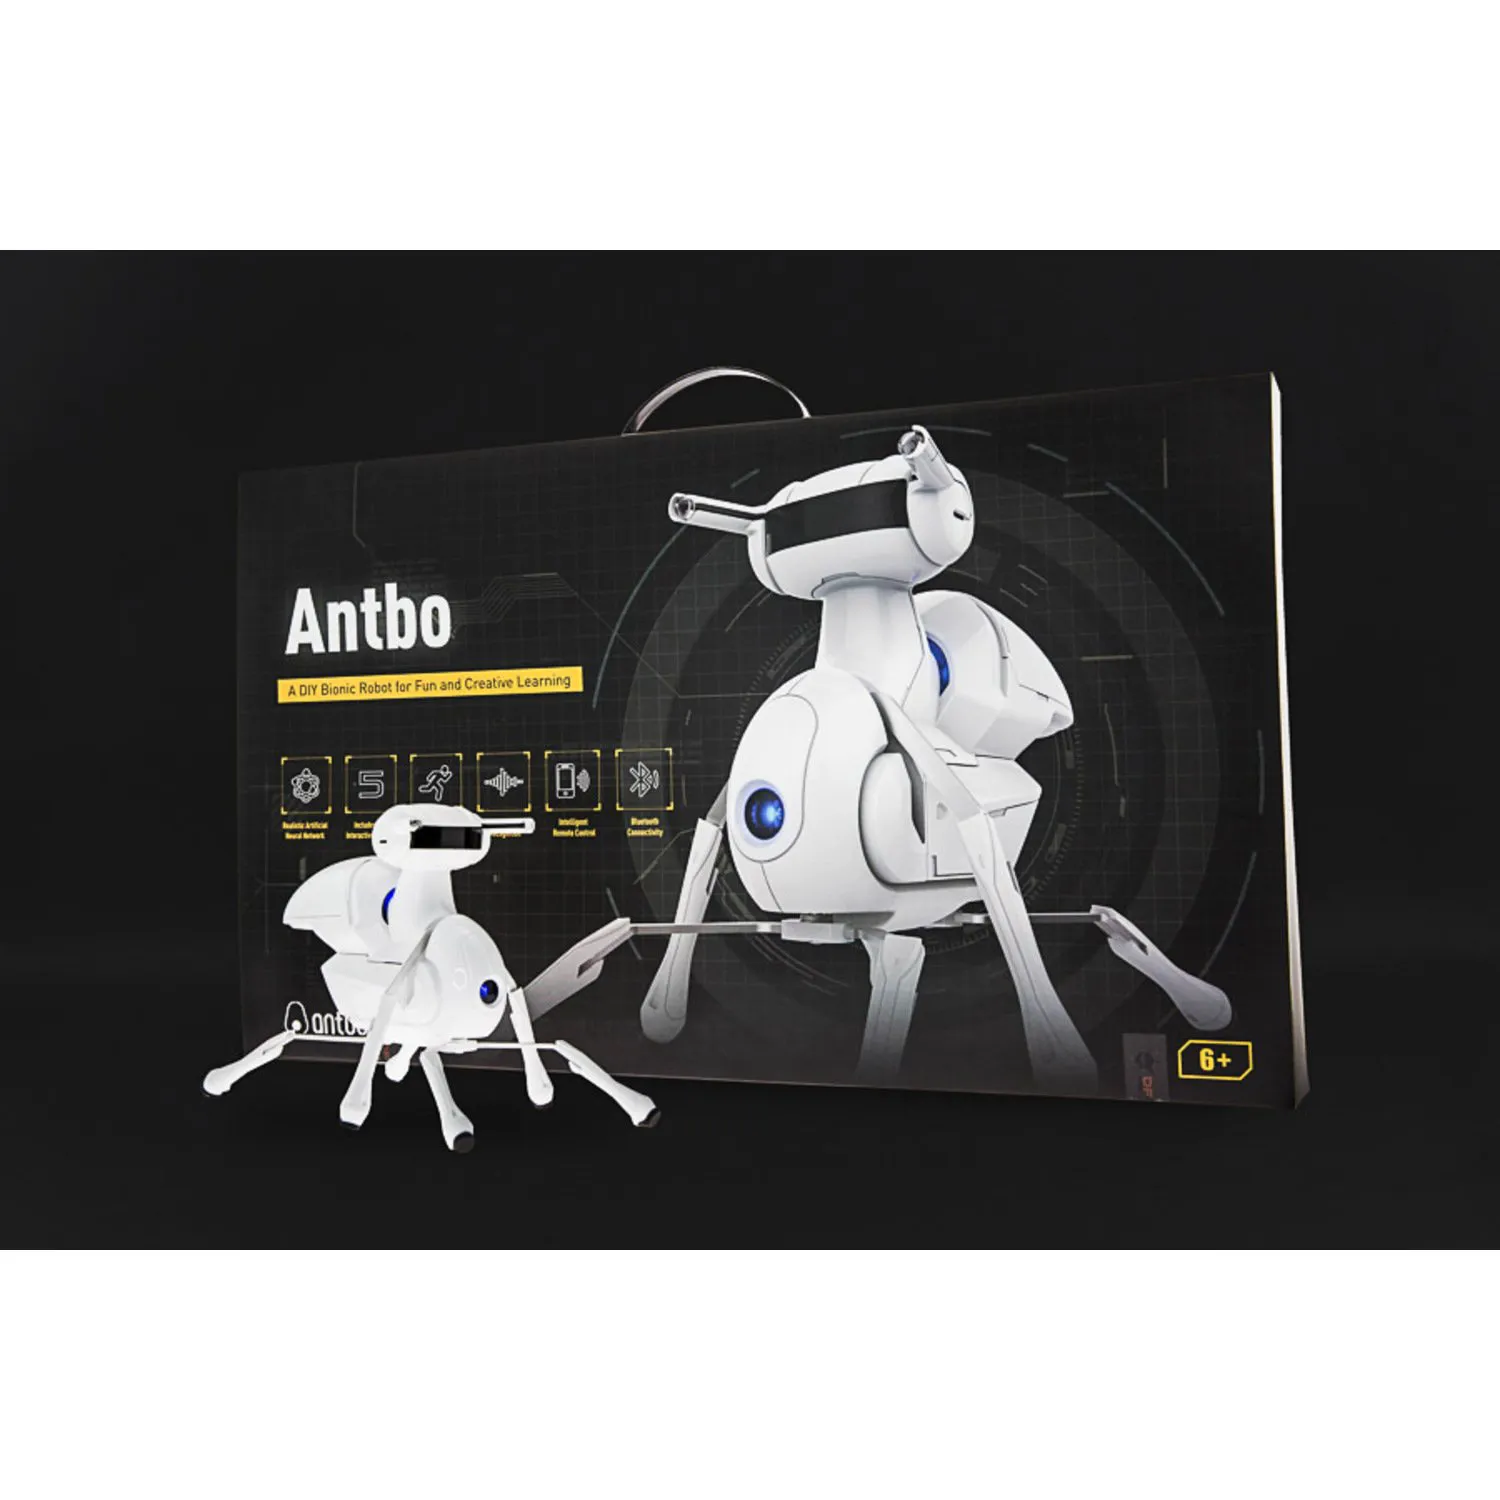 Photo of Antbo DIY Robot Kit - The Best Robot for Kids